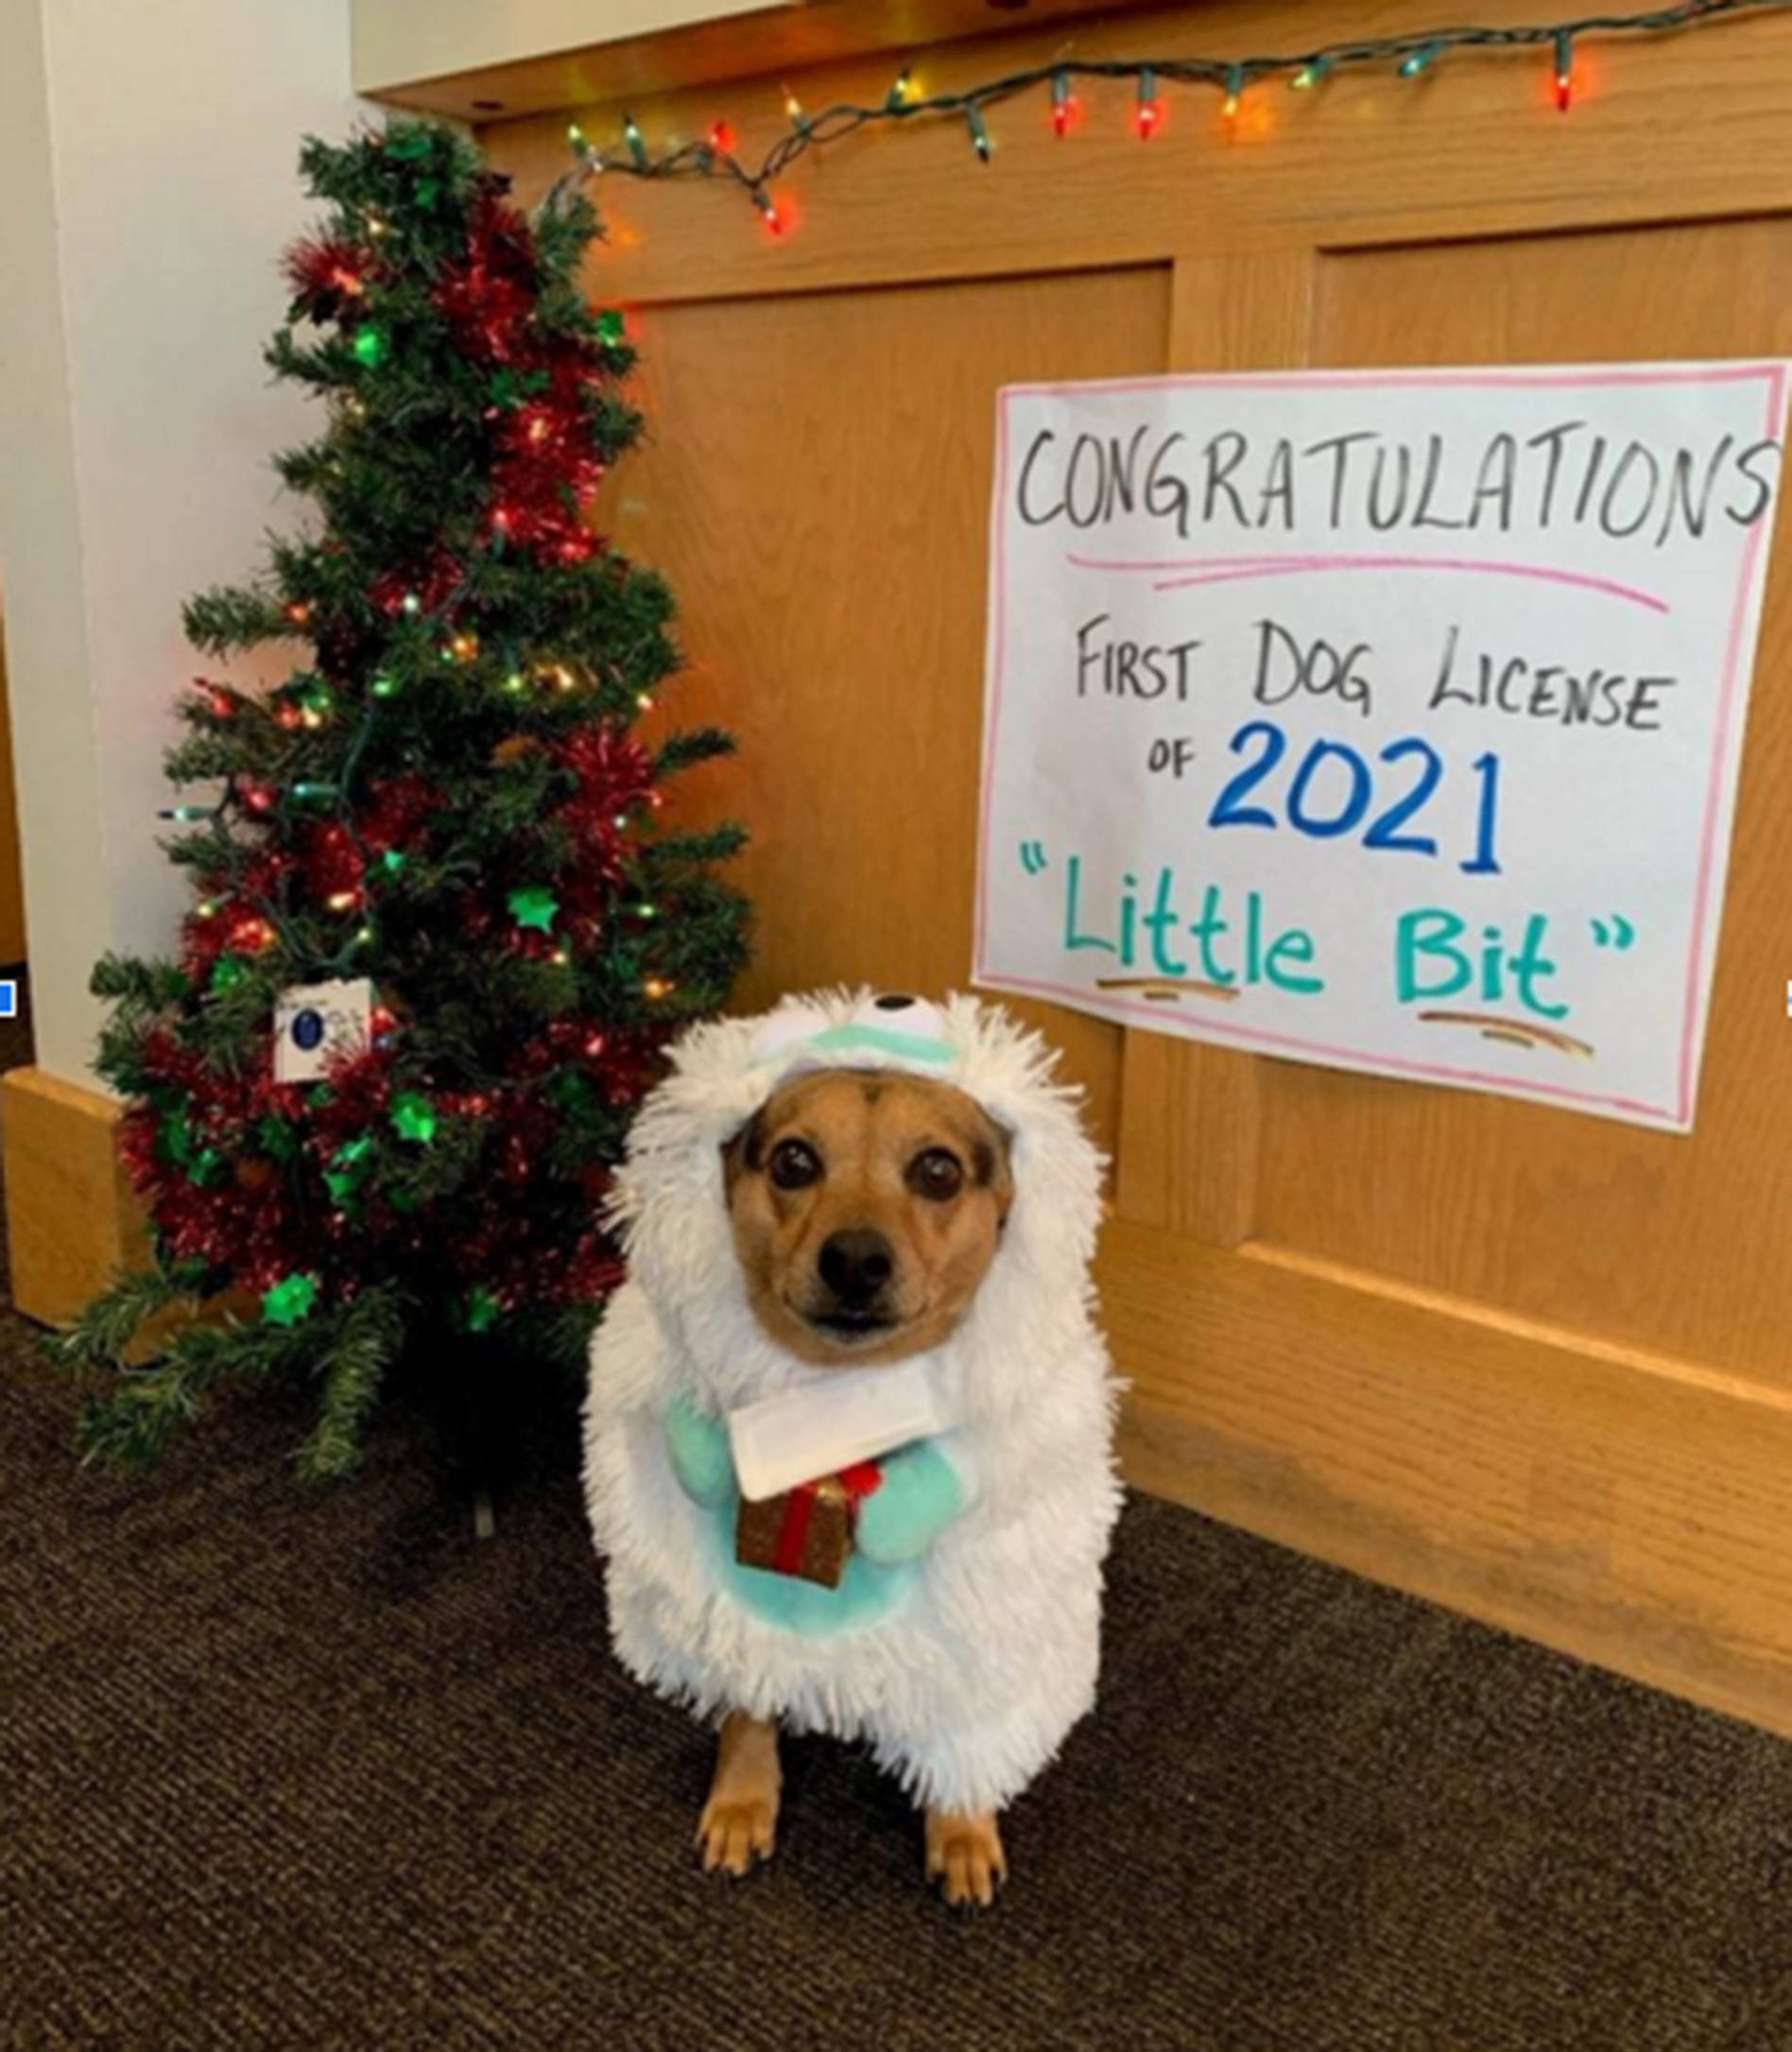 San Juan County/Contributed photo
2021 Celebrity Canine Little Bit, receiving the first tag dressed as a snow monster.